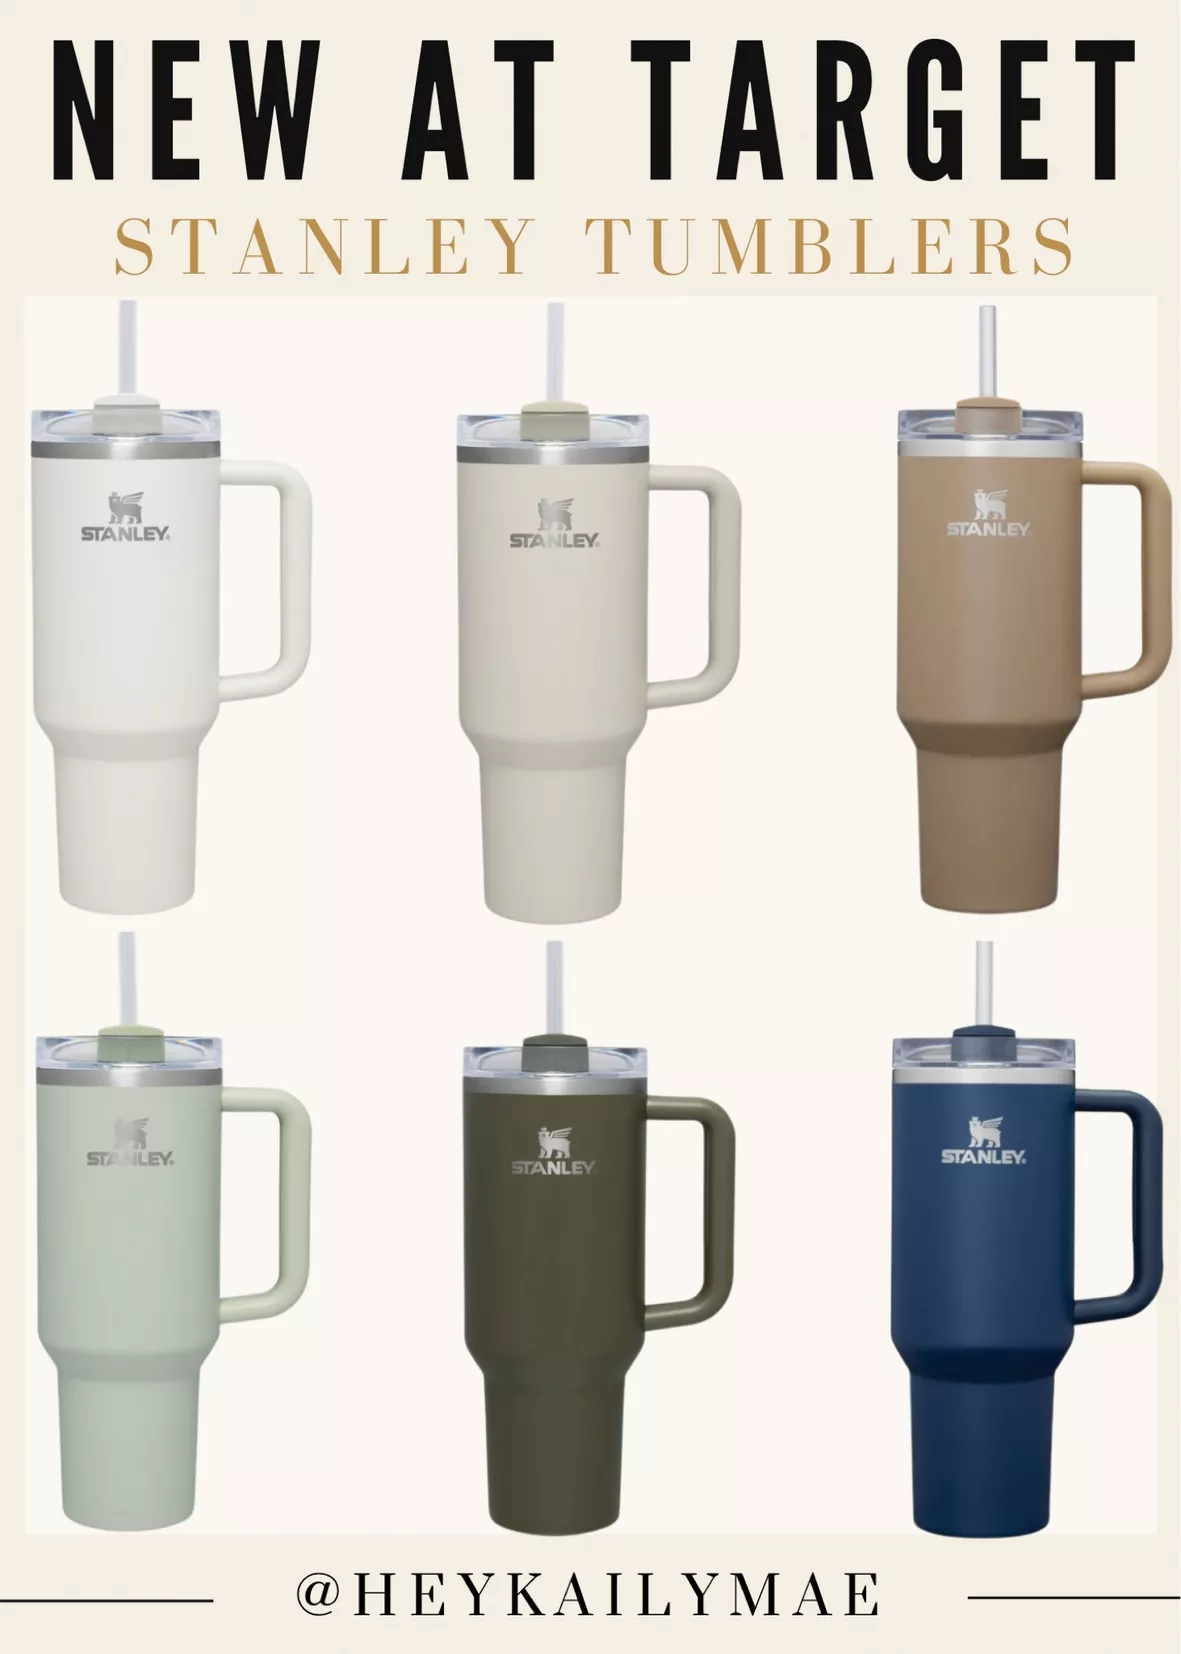 Stanley Tumbler Available at Target